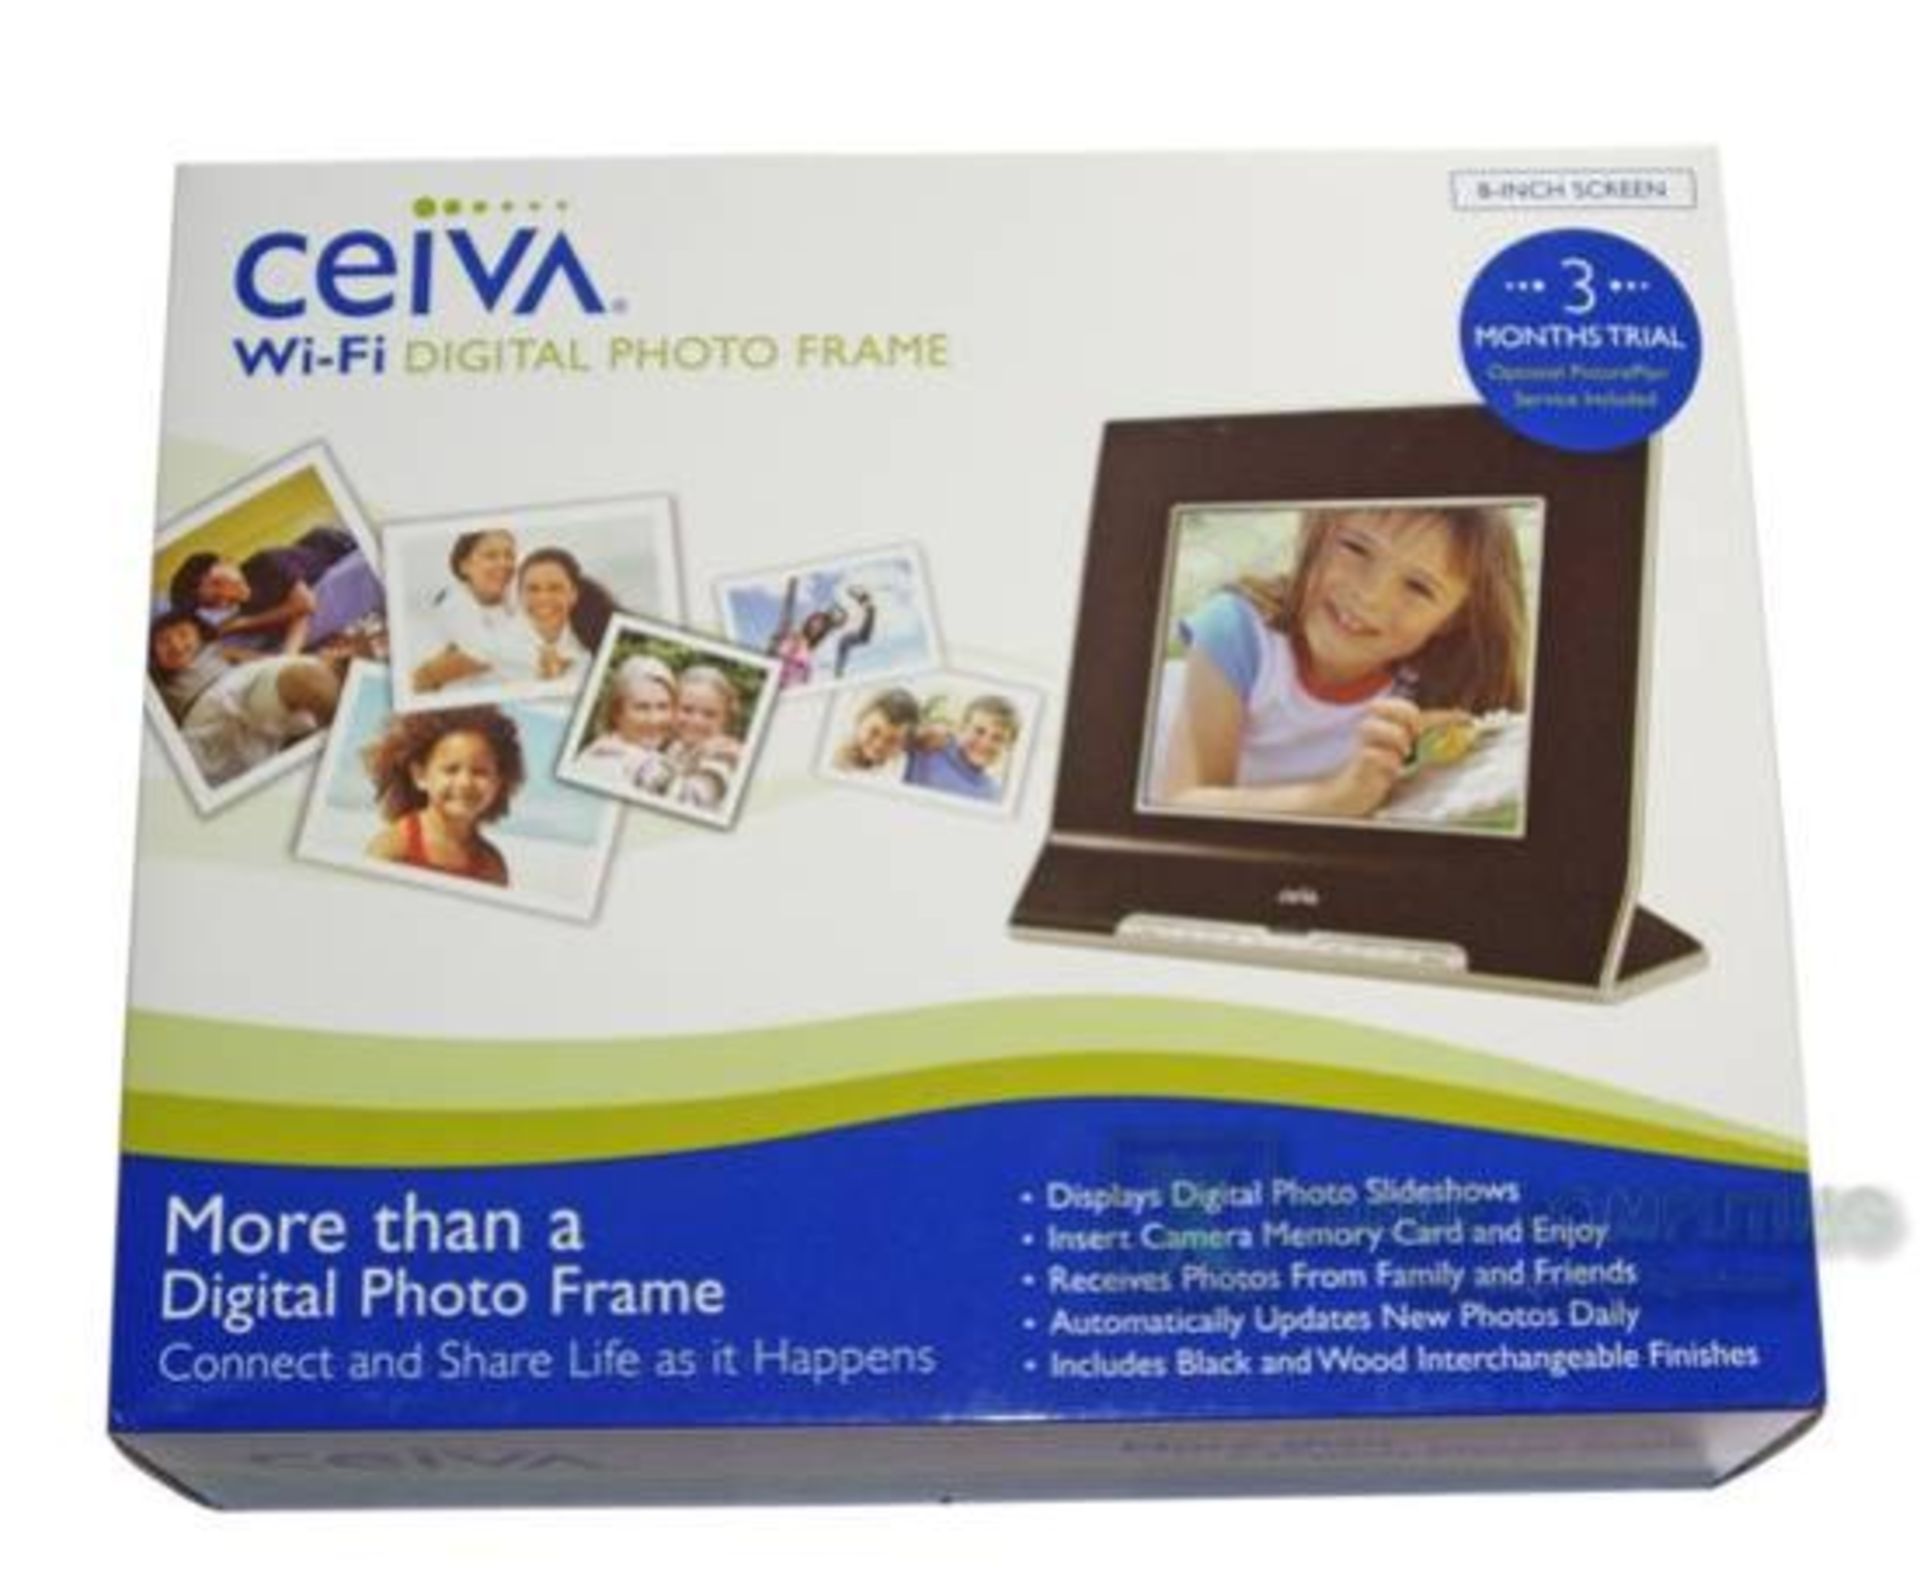 V Brand New Ceiva 8" Digital Photo Frame with SD Card Slot - Wi-Fi and Broadband Ready - ISP $200.00 - Image 2 of 2